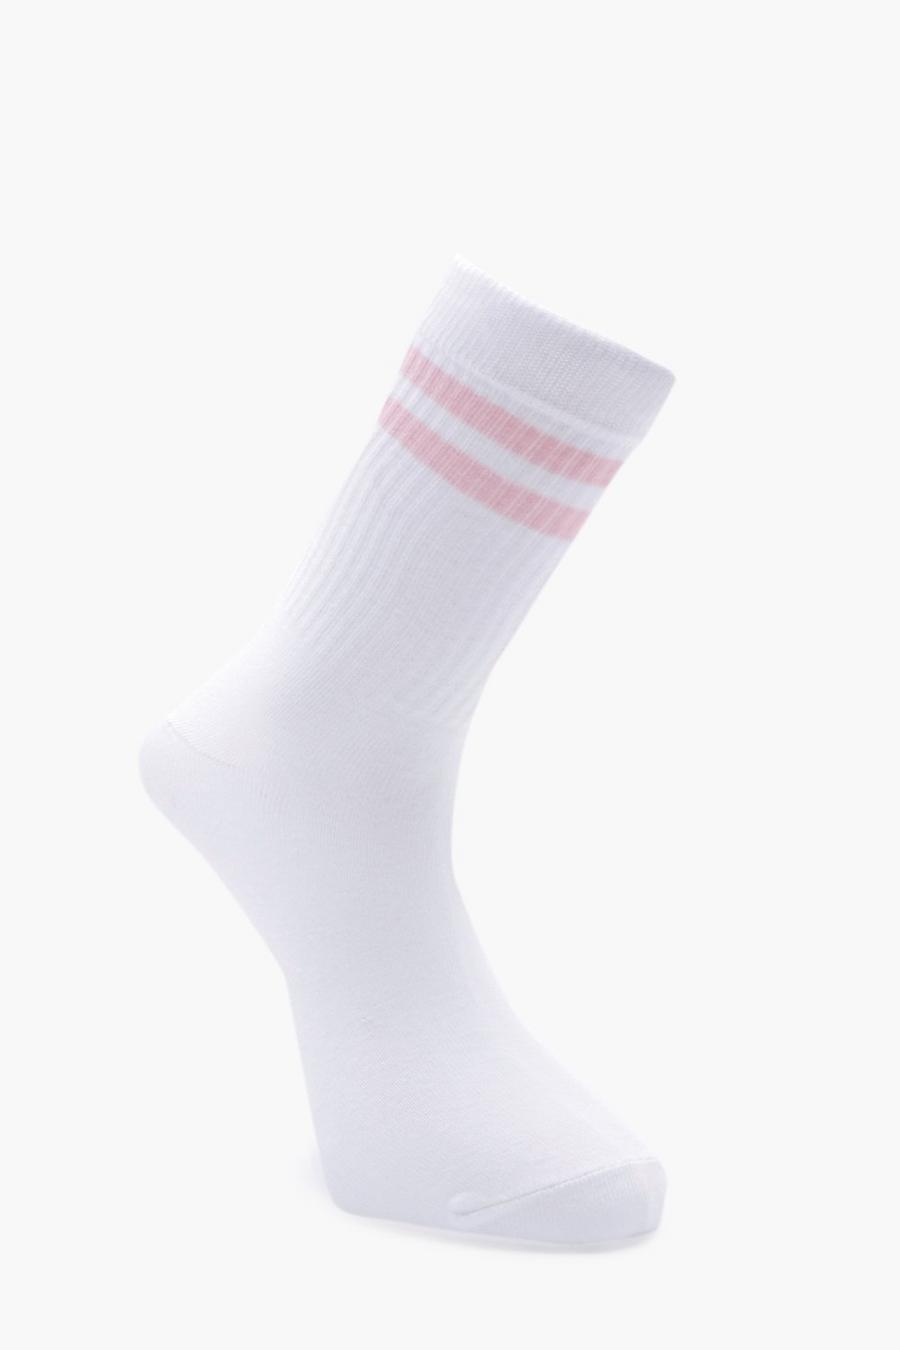 White Sport Socks With Pink Stripes image number 1